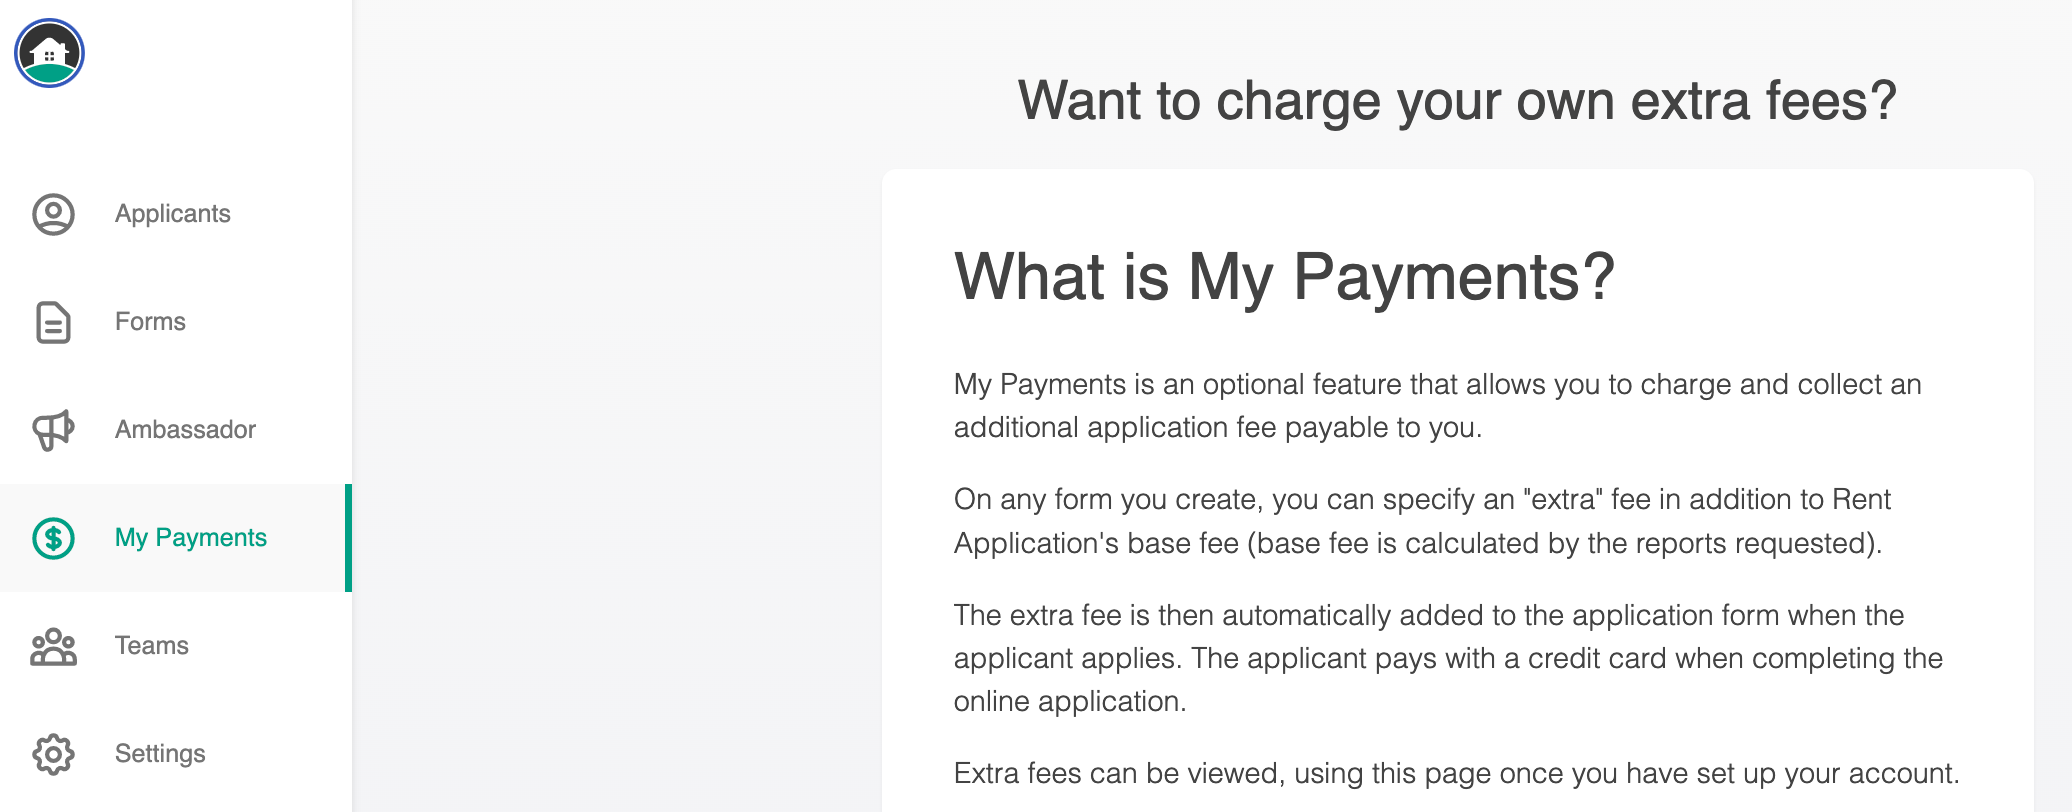 how-do-i-set-up-my-own-application-fees-using-my-payments